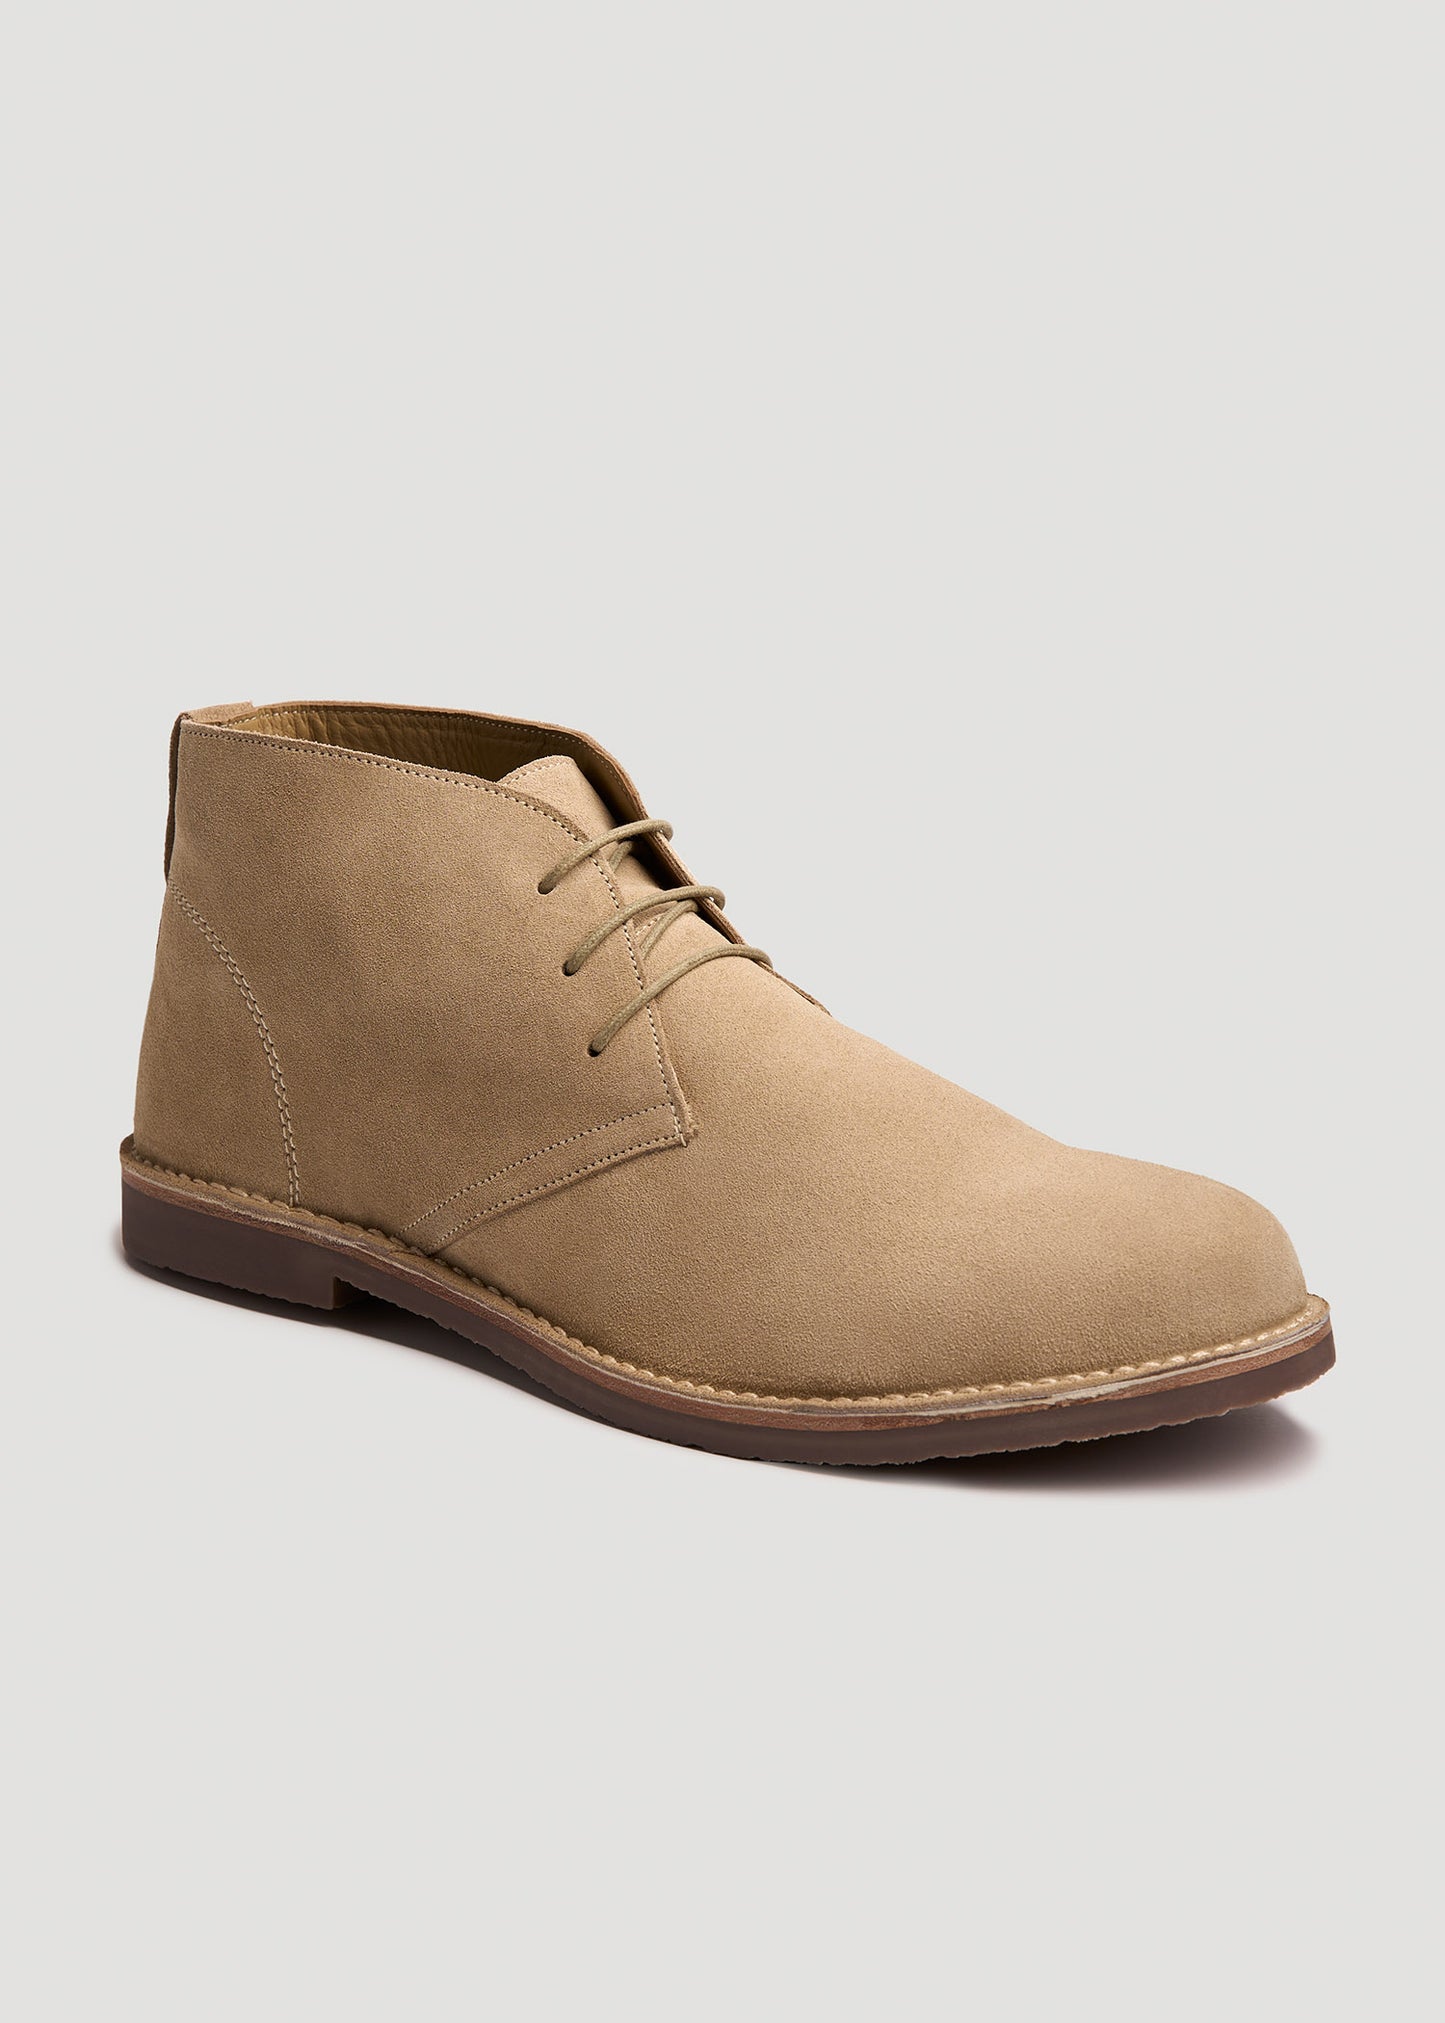 Side view of American Tall's Men's Chukka Boots in Cappuccino.